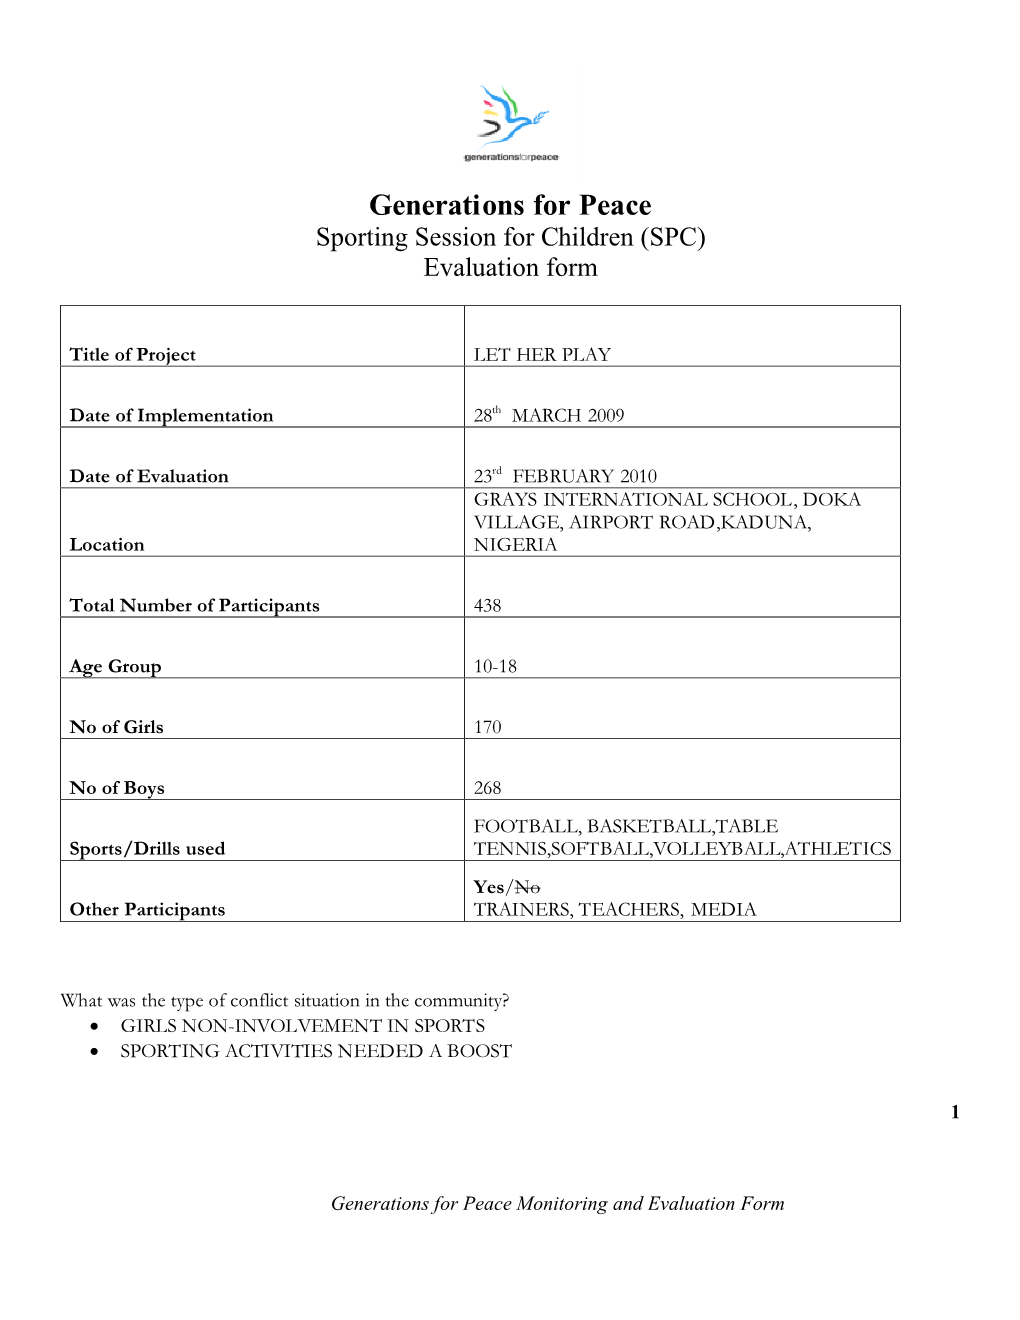 Generations for Peace Sporting Session for Children (SPC) Evaluation Form